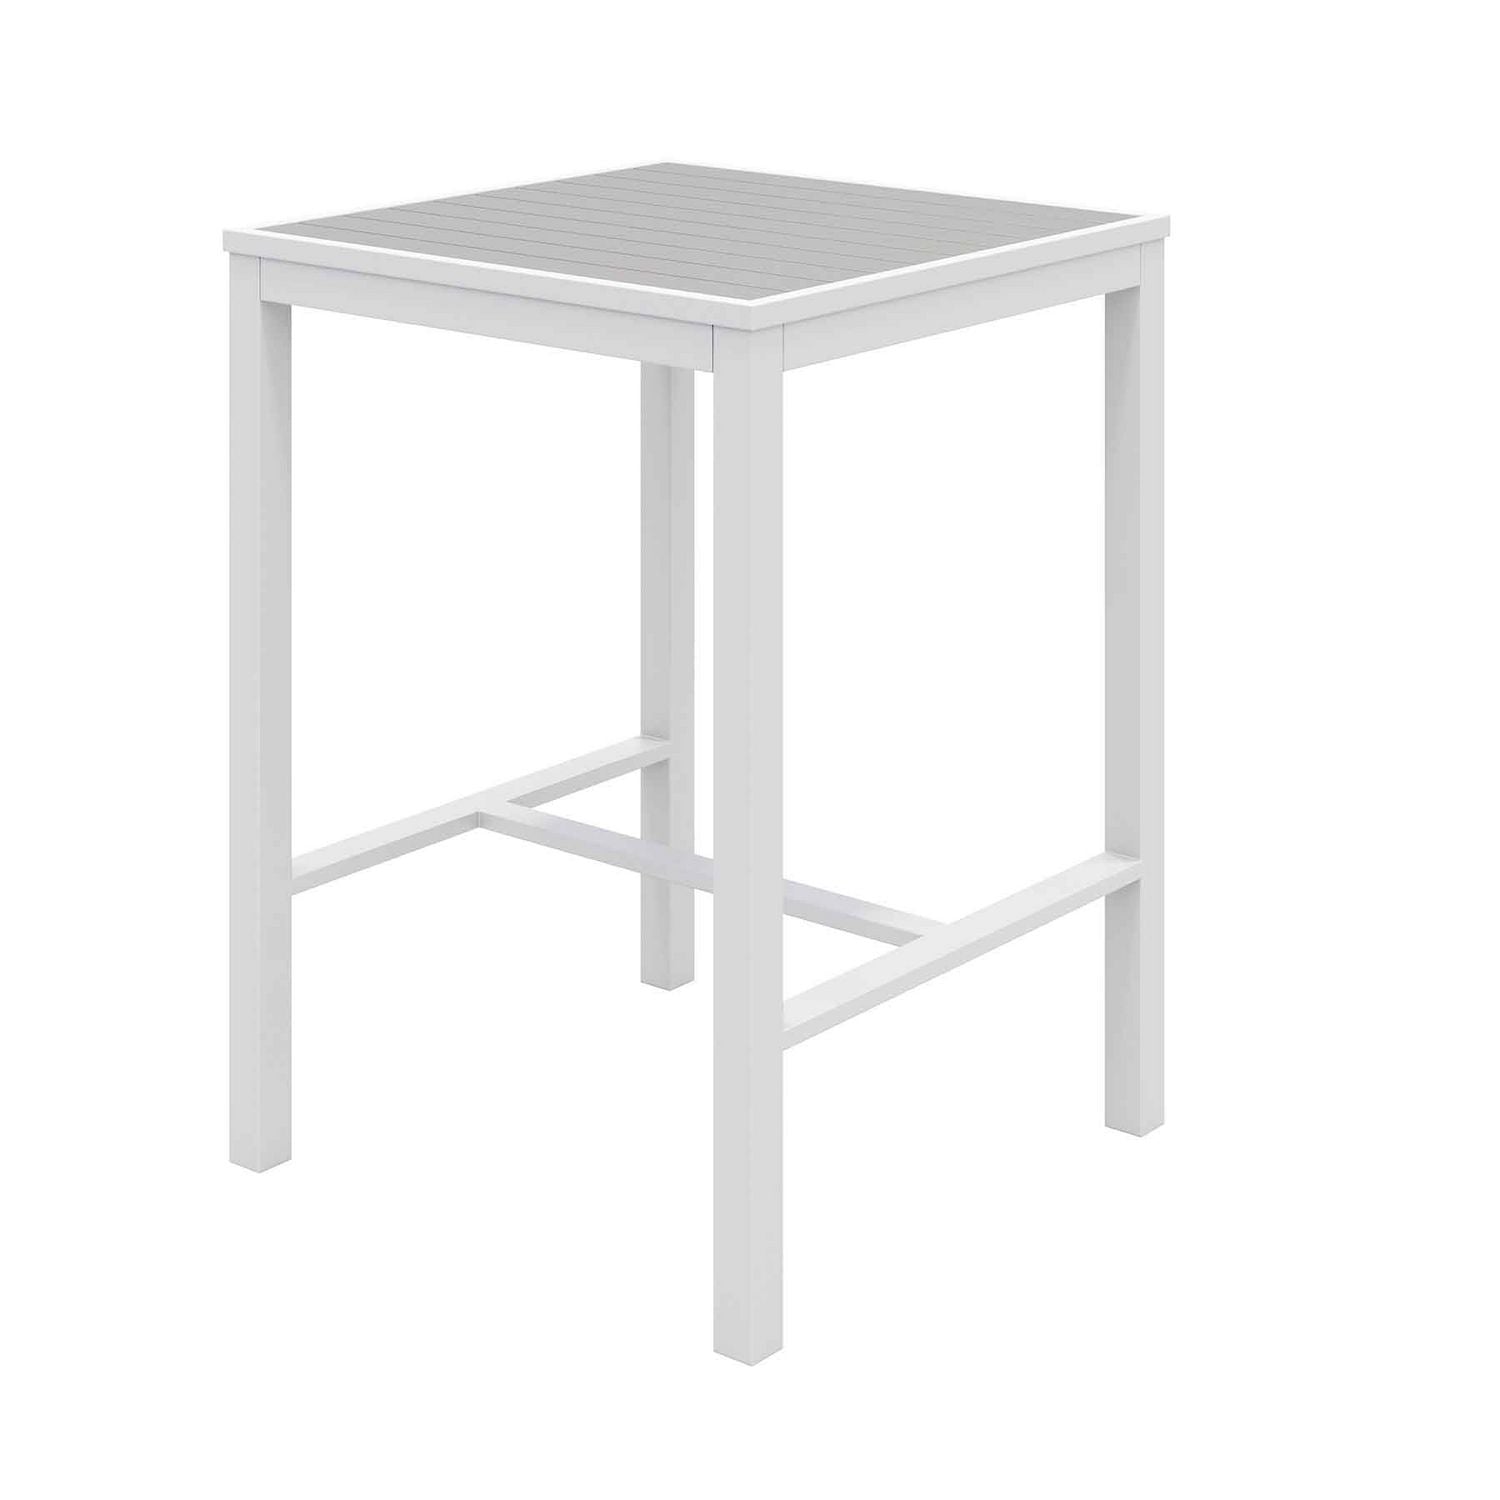 eveleen-outdoor-bistro-patio-table-with-two-gray-powder-coated-polymer-barstools-30-square-gray-ships-in-4-6-bus-days_kfi840031925268 - 2